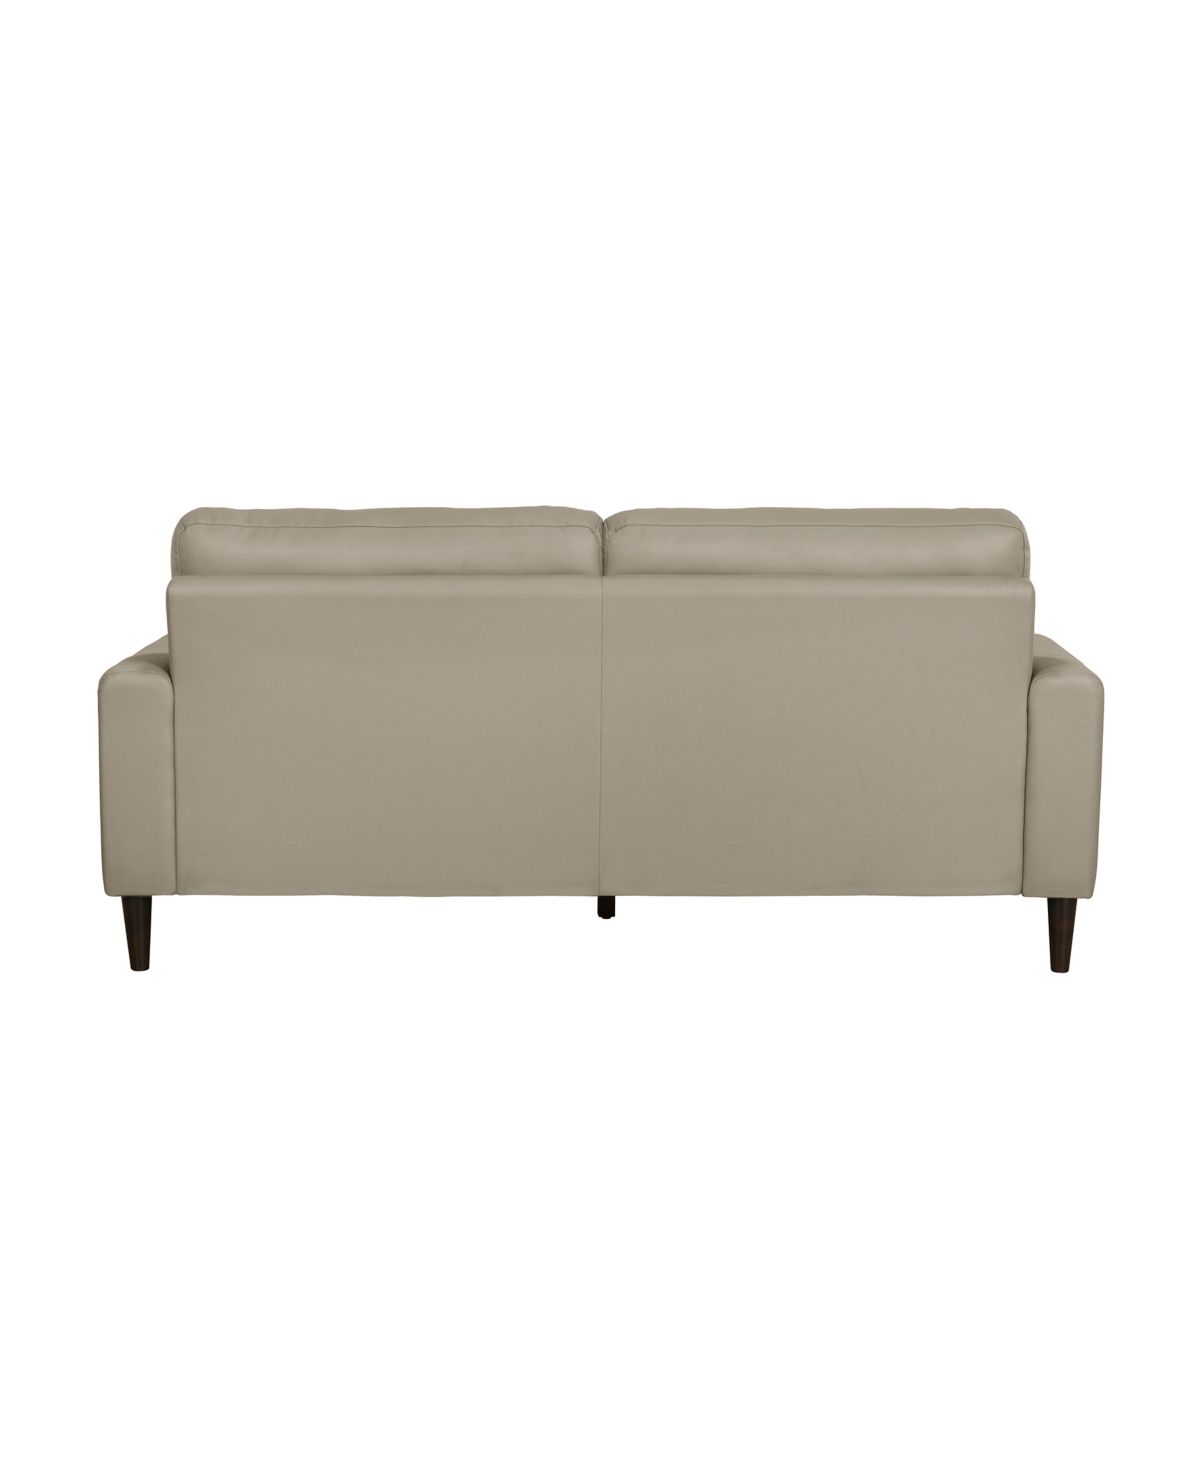 Shop Homelegance White Label Tabor 76" Leather Match Sofa In Beige